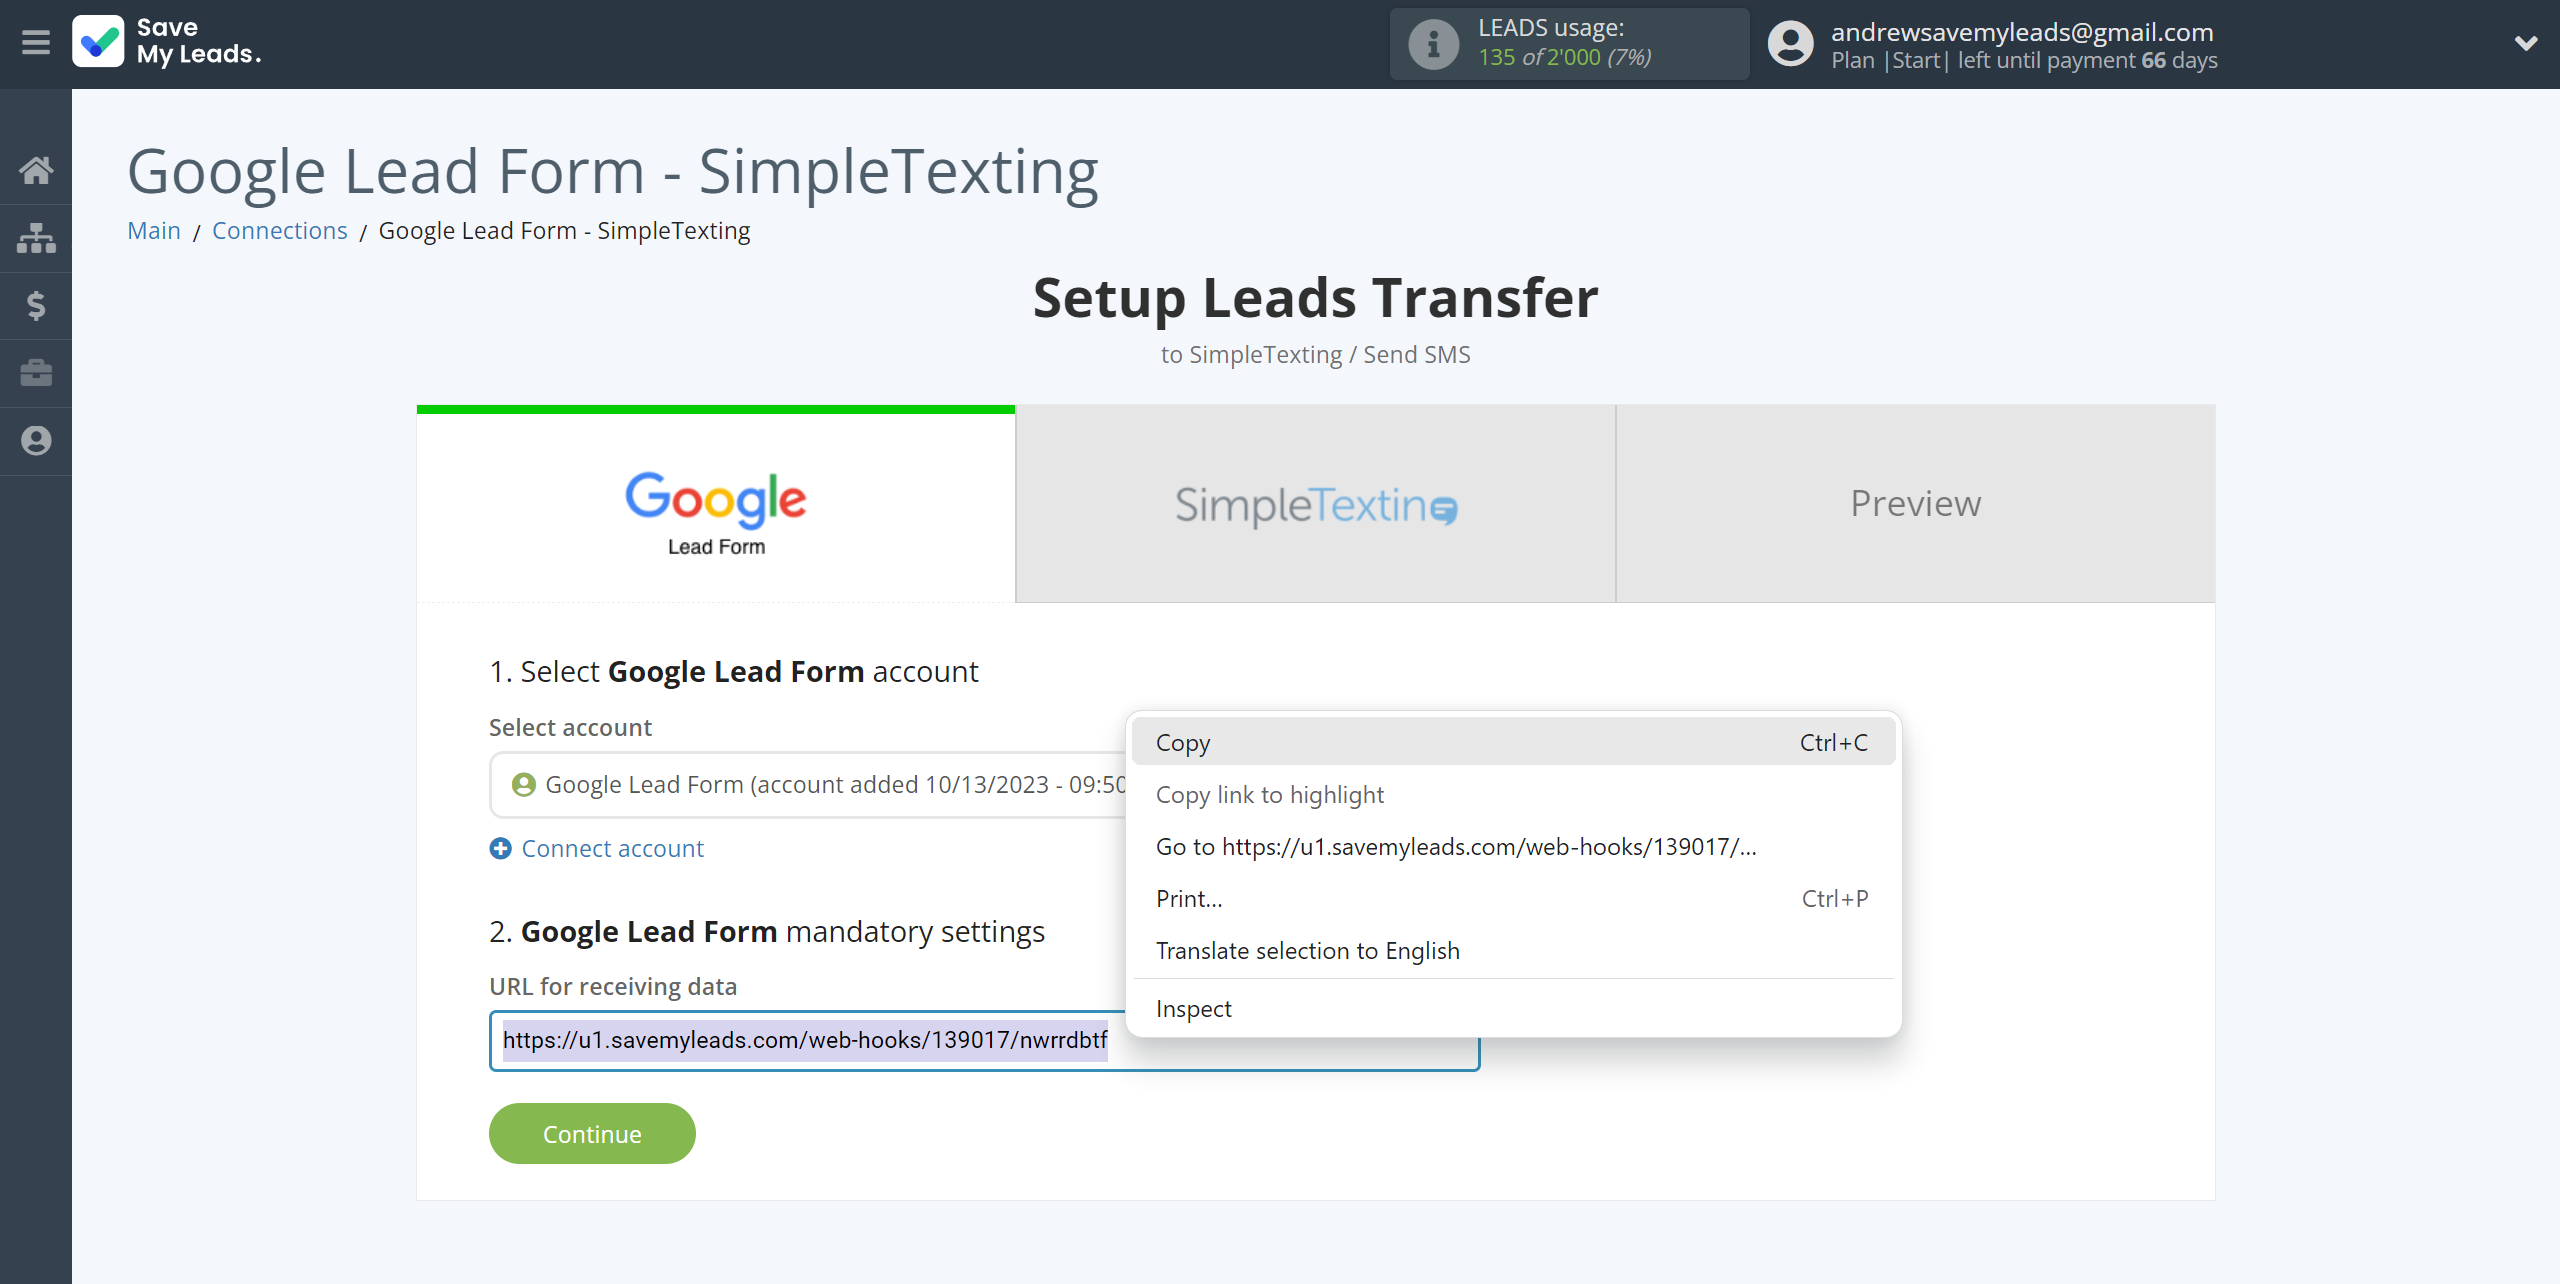 How to Connect Google Lead Form with SimpleTexting | Data Source account connection